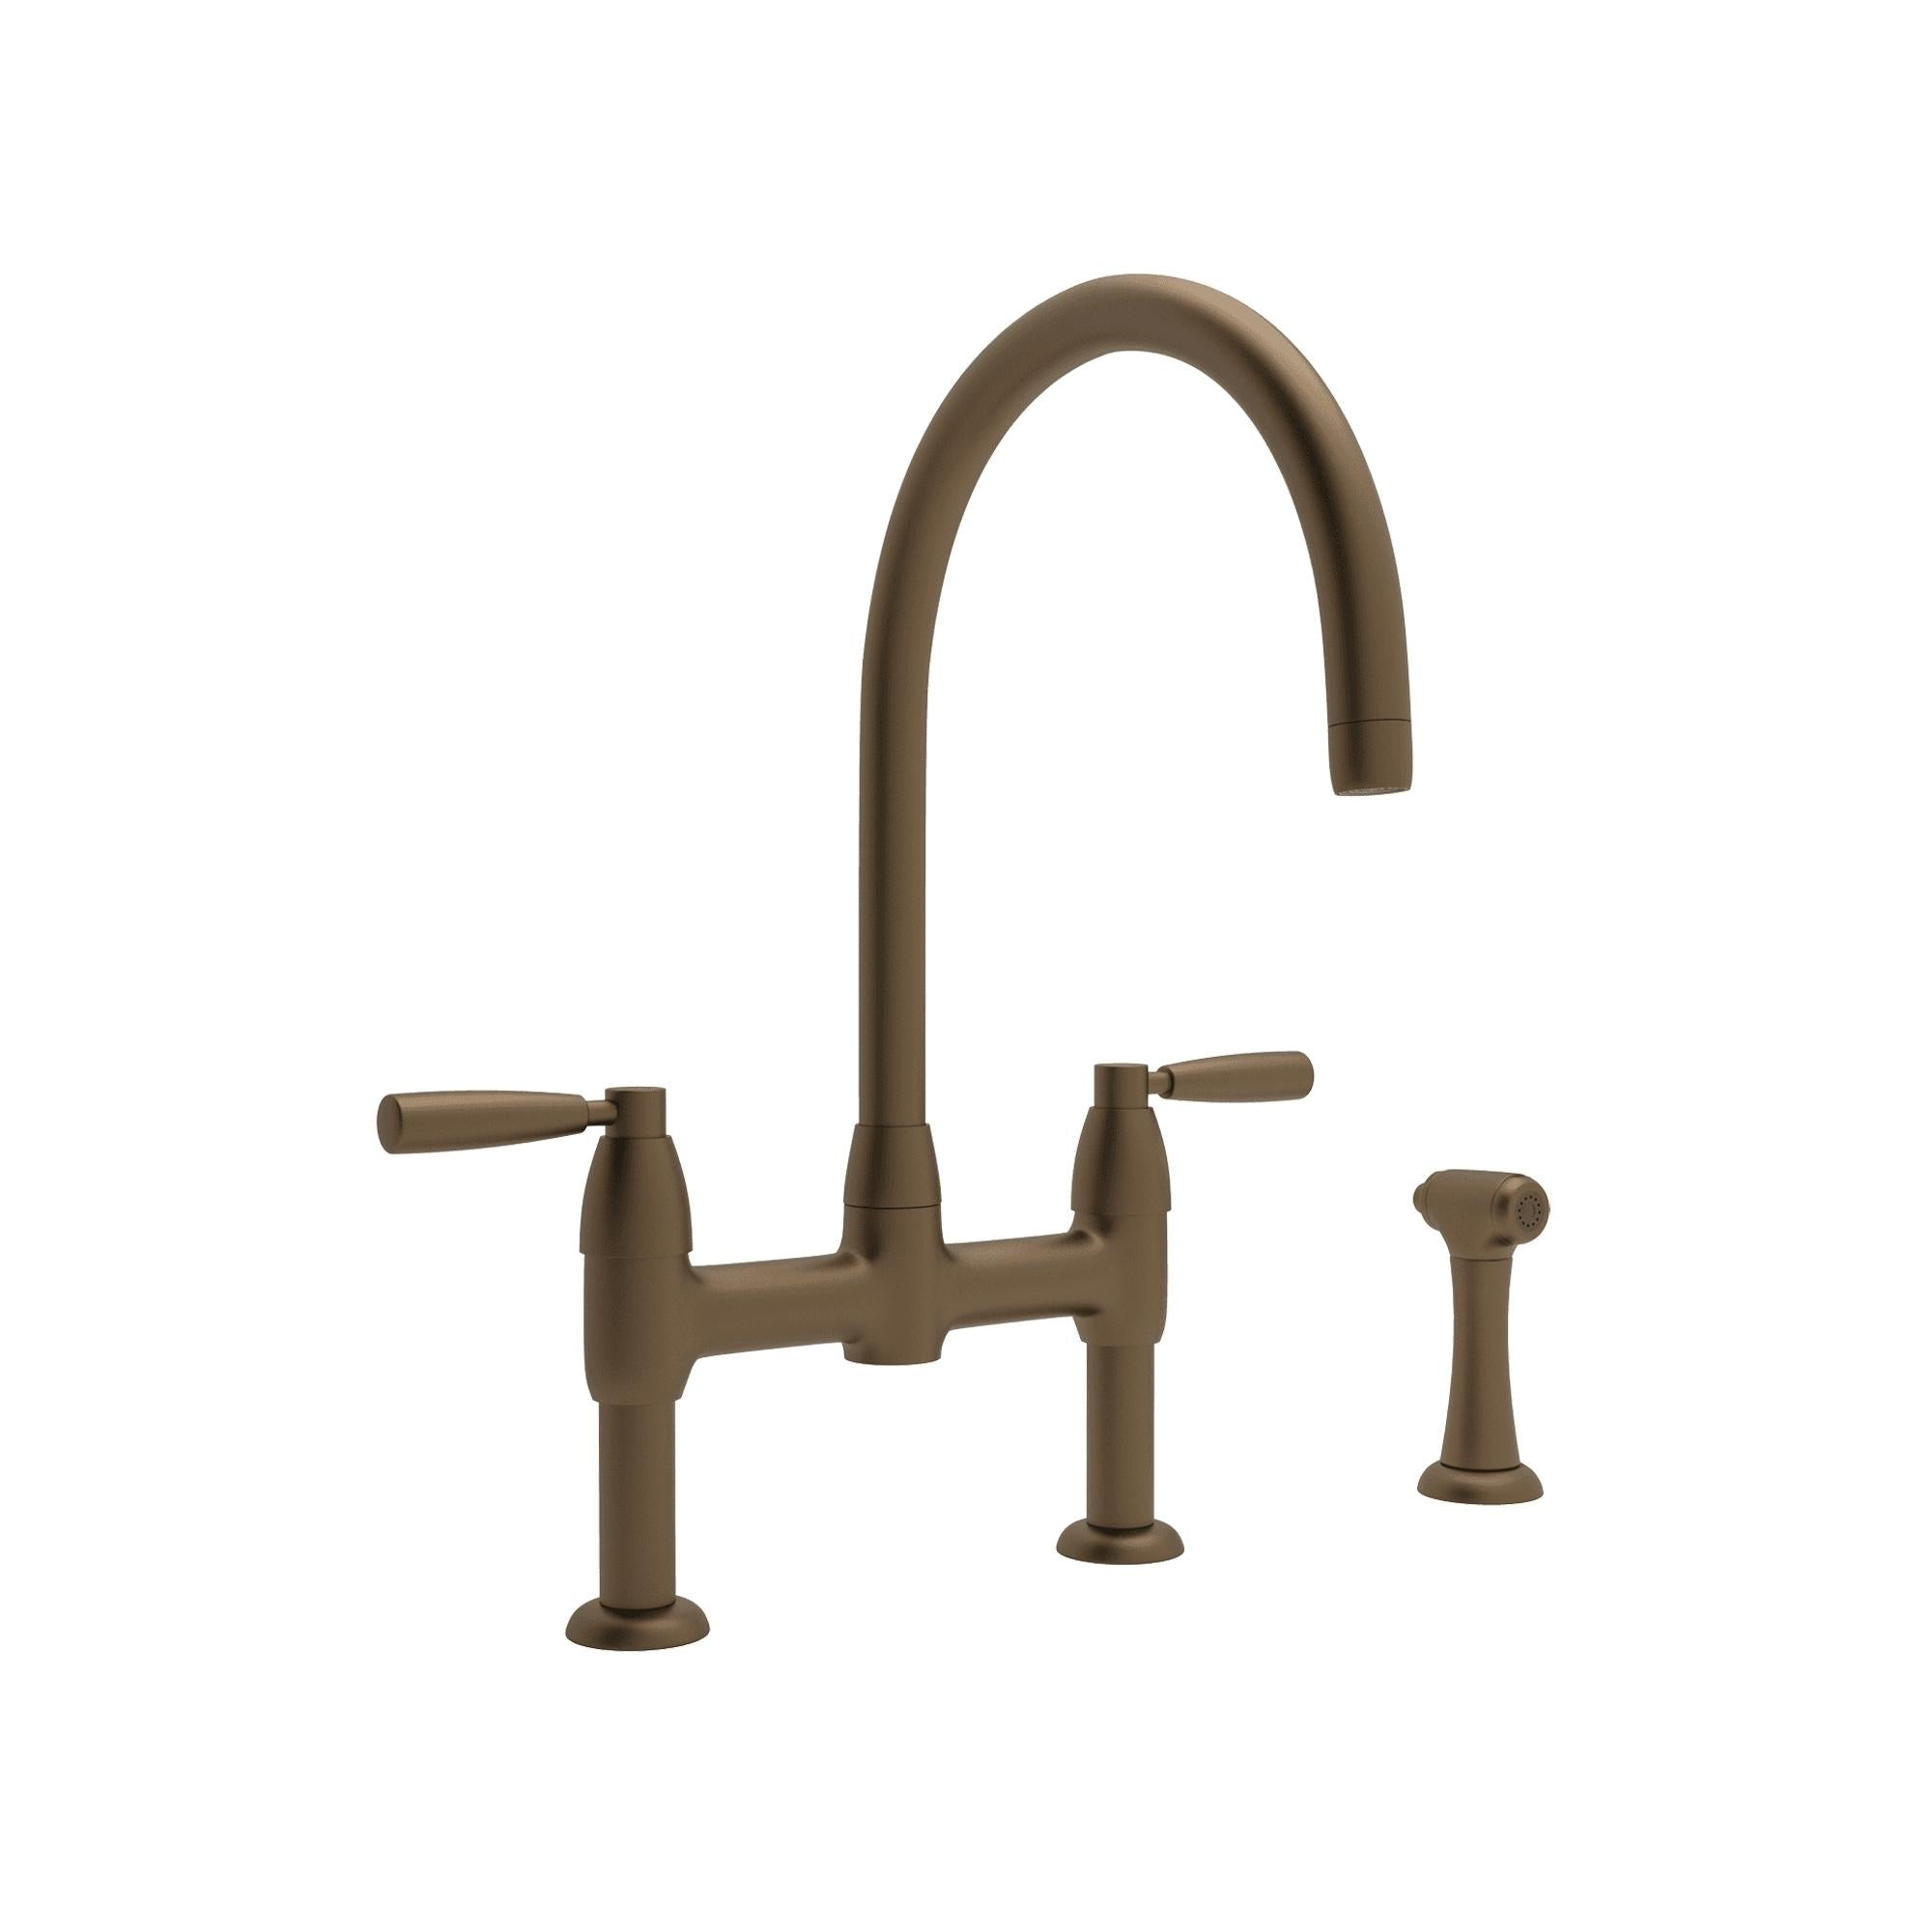 Perrin & Rowe U.4273 Holborn Bridge Kitchen Faucet with C-Spout and Side Spray